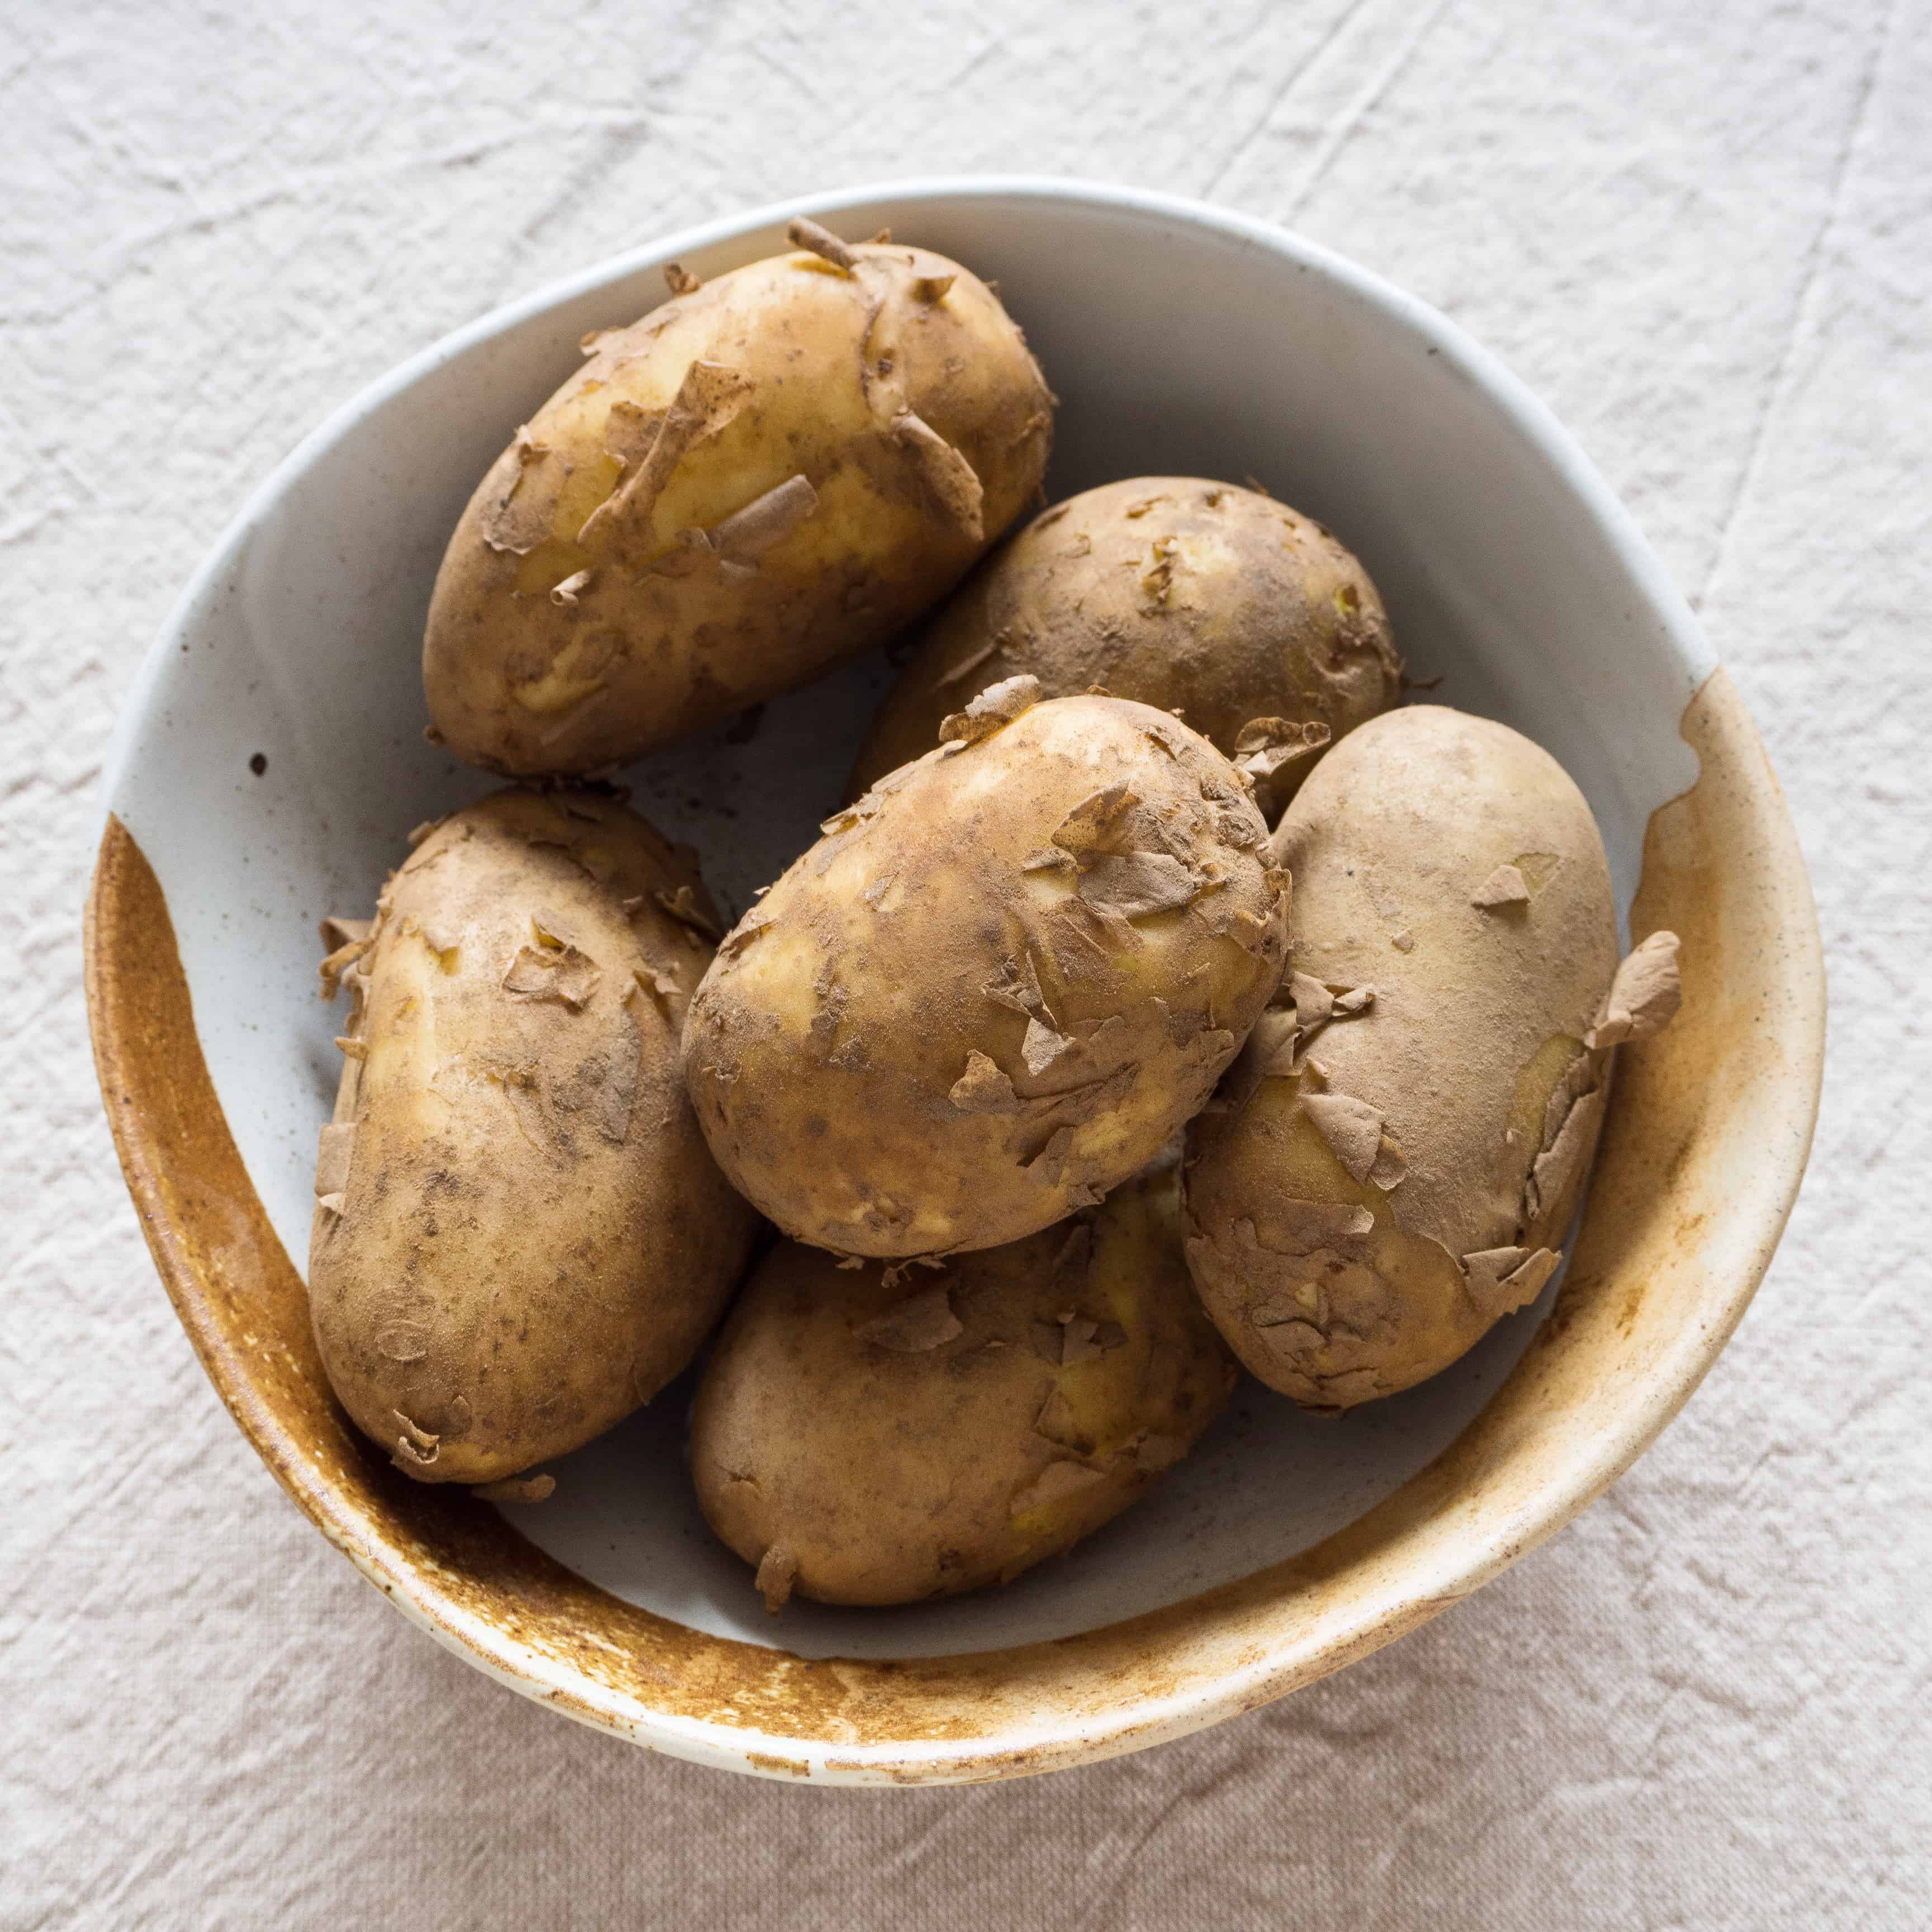 where can i buy jersey royals